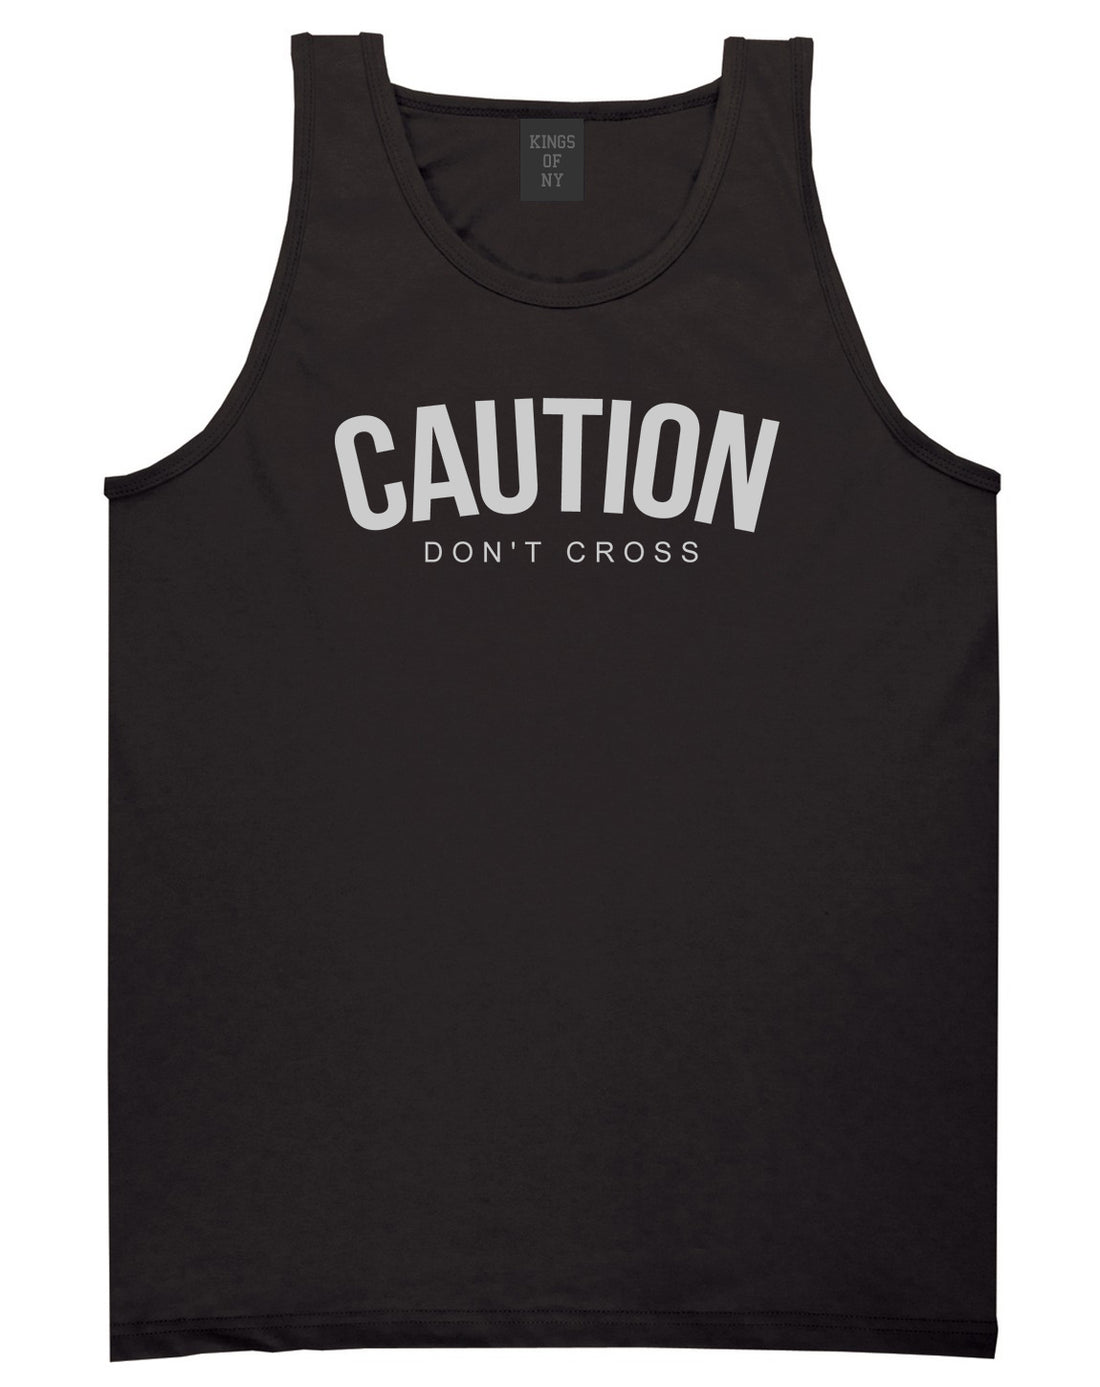 Caution Dont Cross Mens Tank Top Shirt Black by Kings Of NY